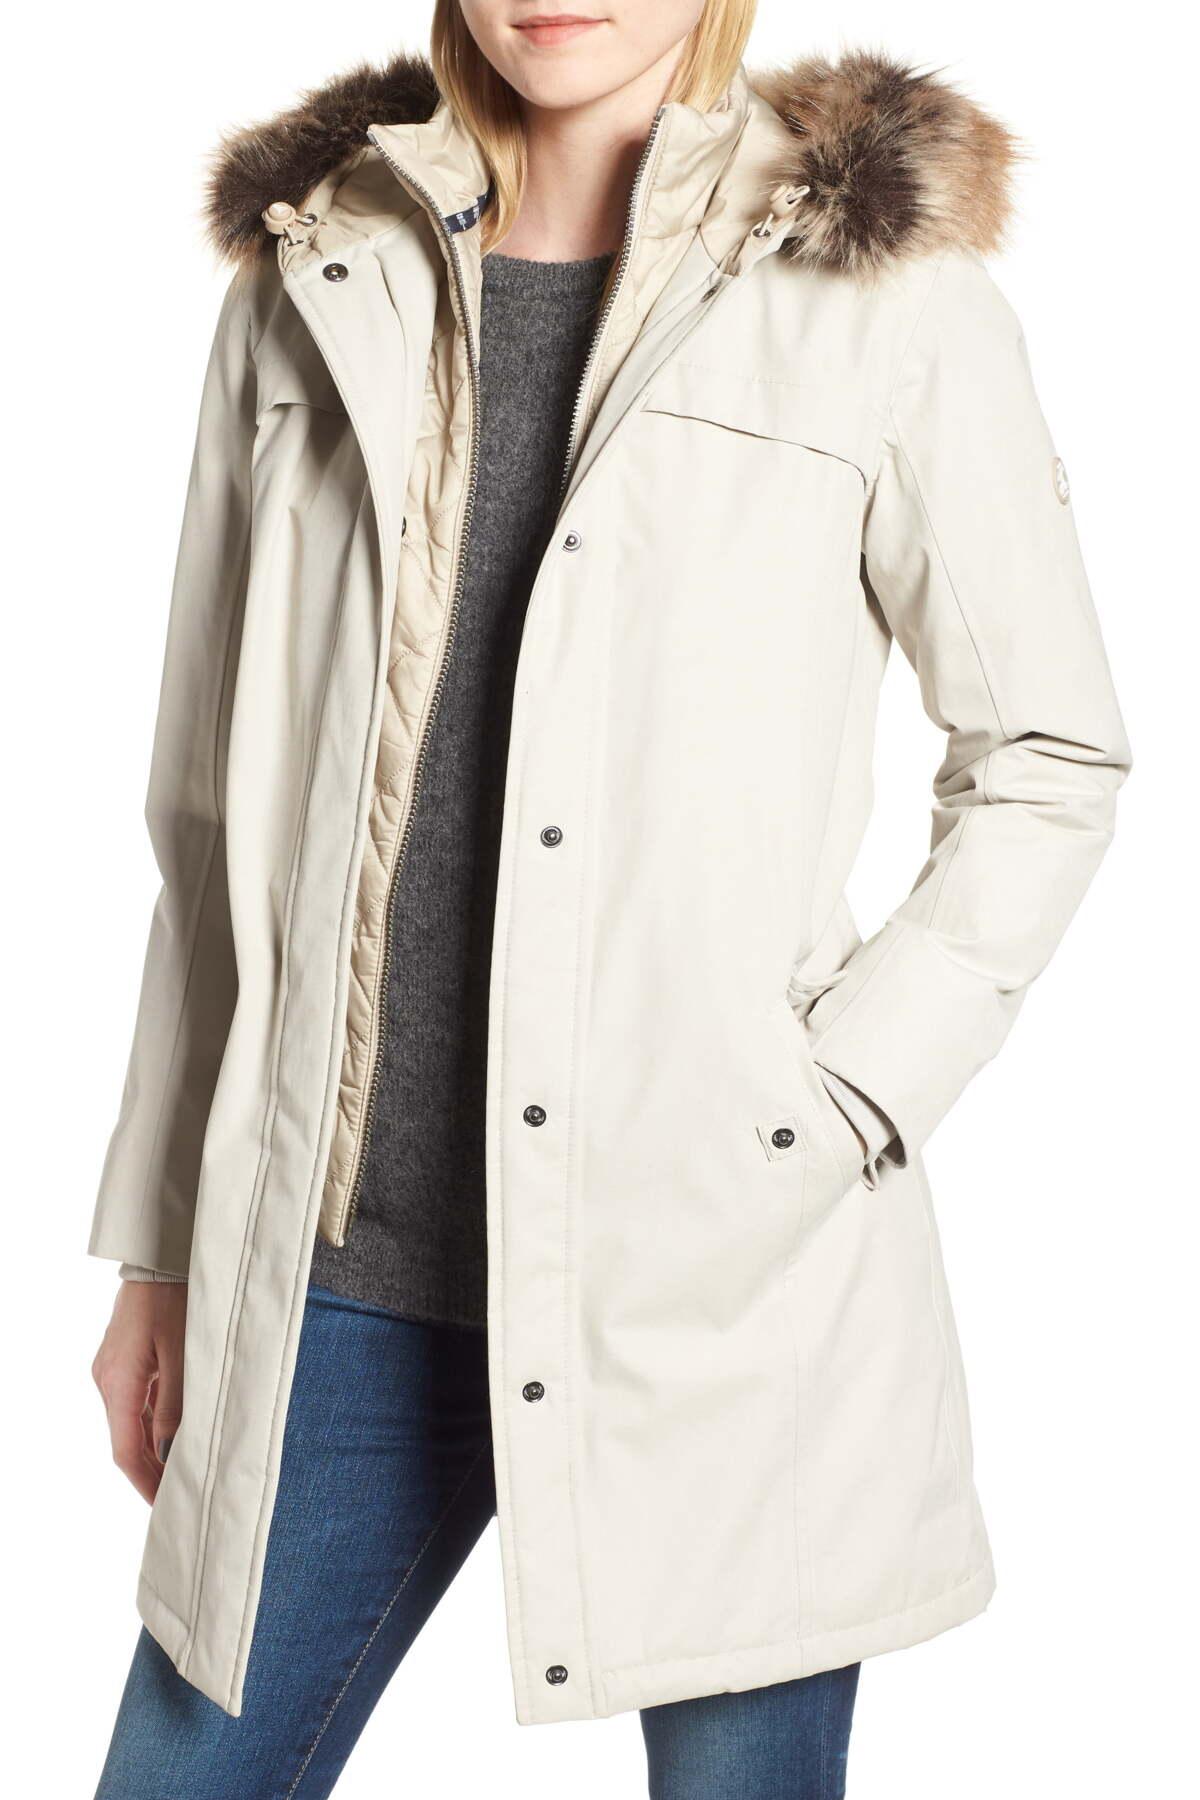 Barbour Coldhurst Waterproof Breathable Jacket in Natural - Lyst